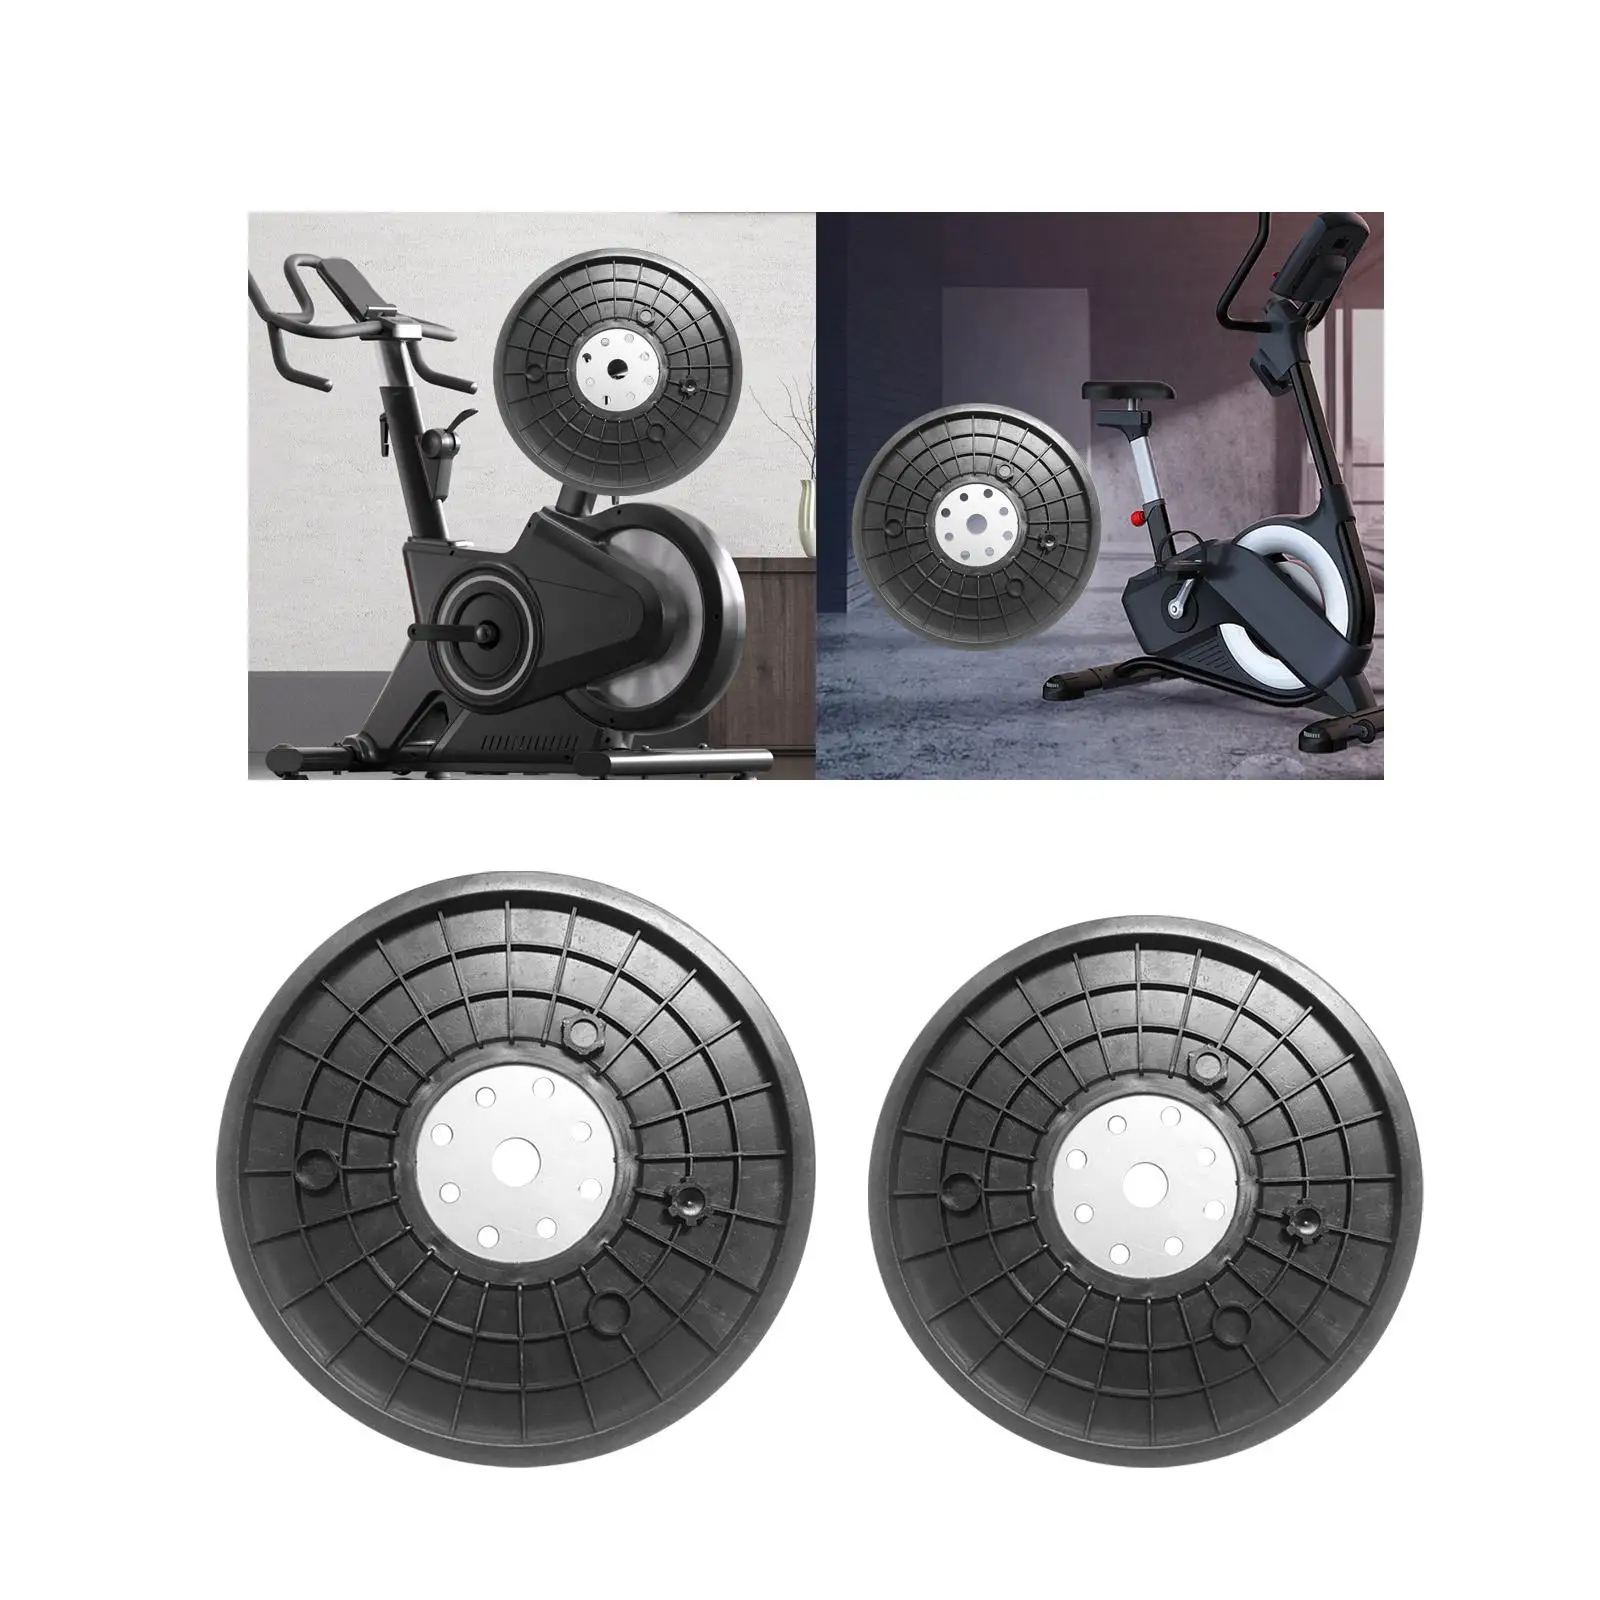 Exercise Bike Drive Disc Wheel Easy to Install Bicycle Equipment Accessories